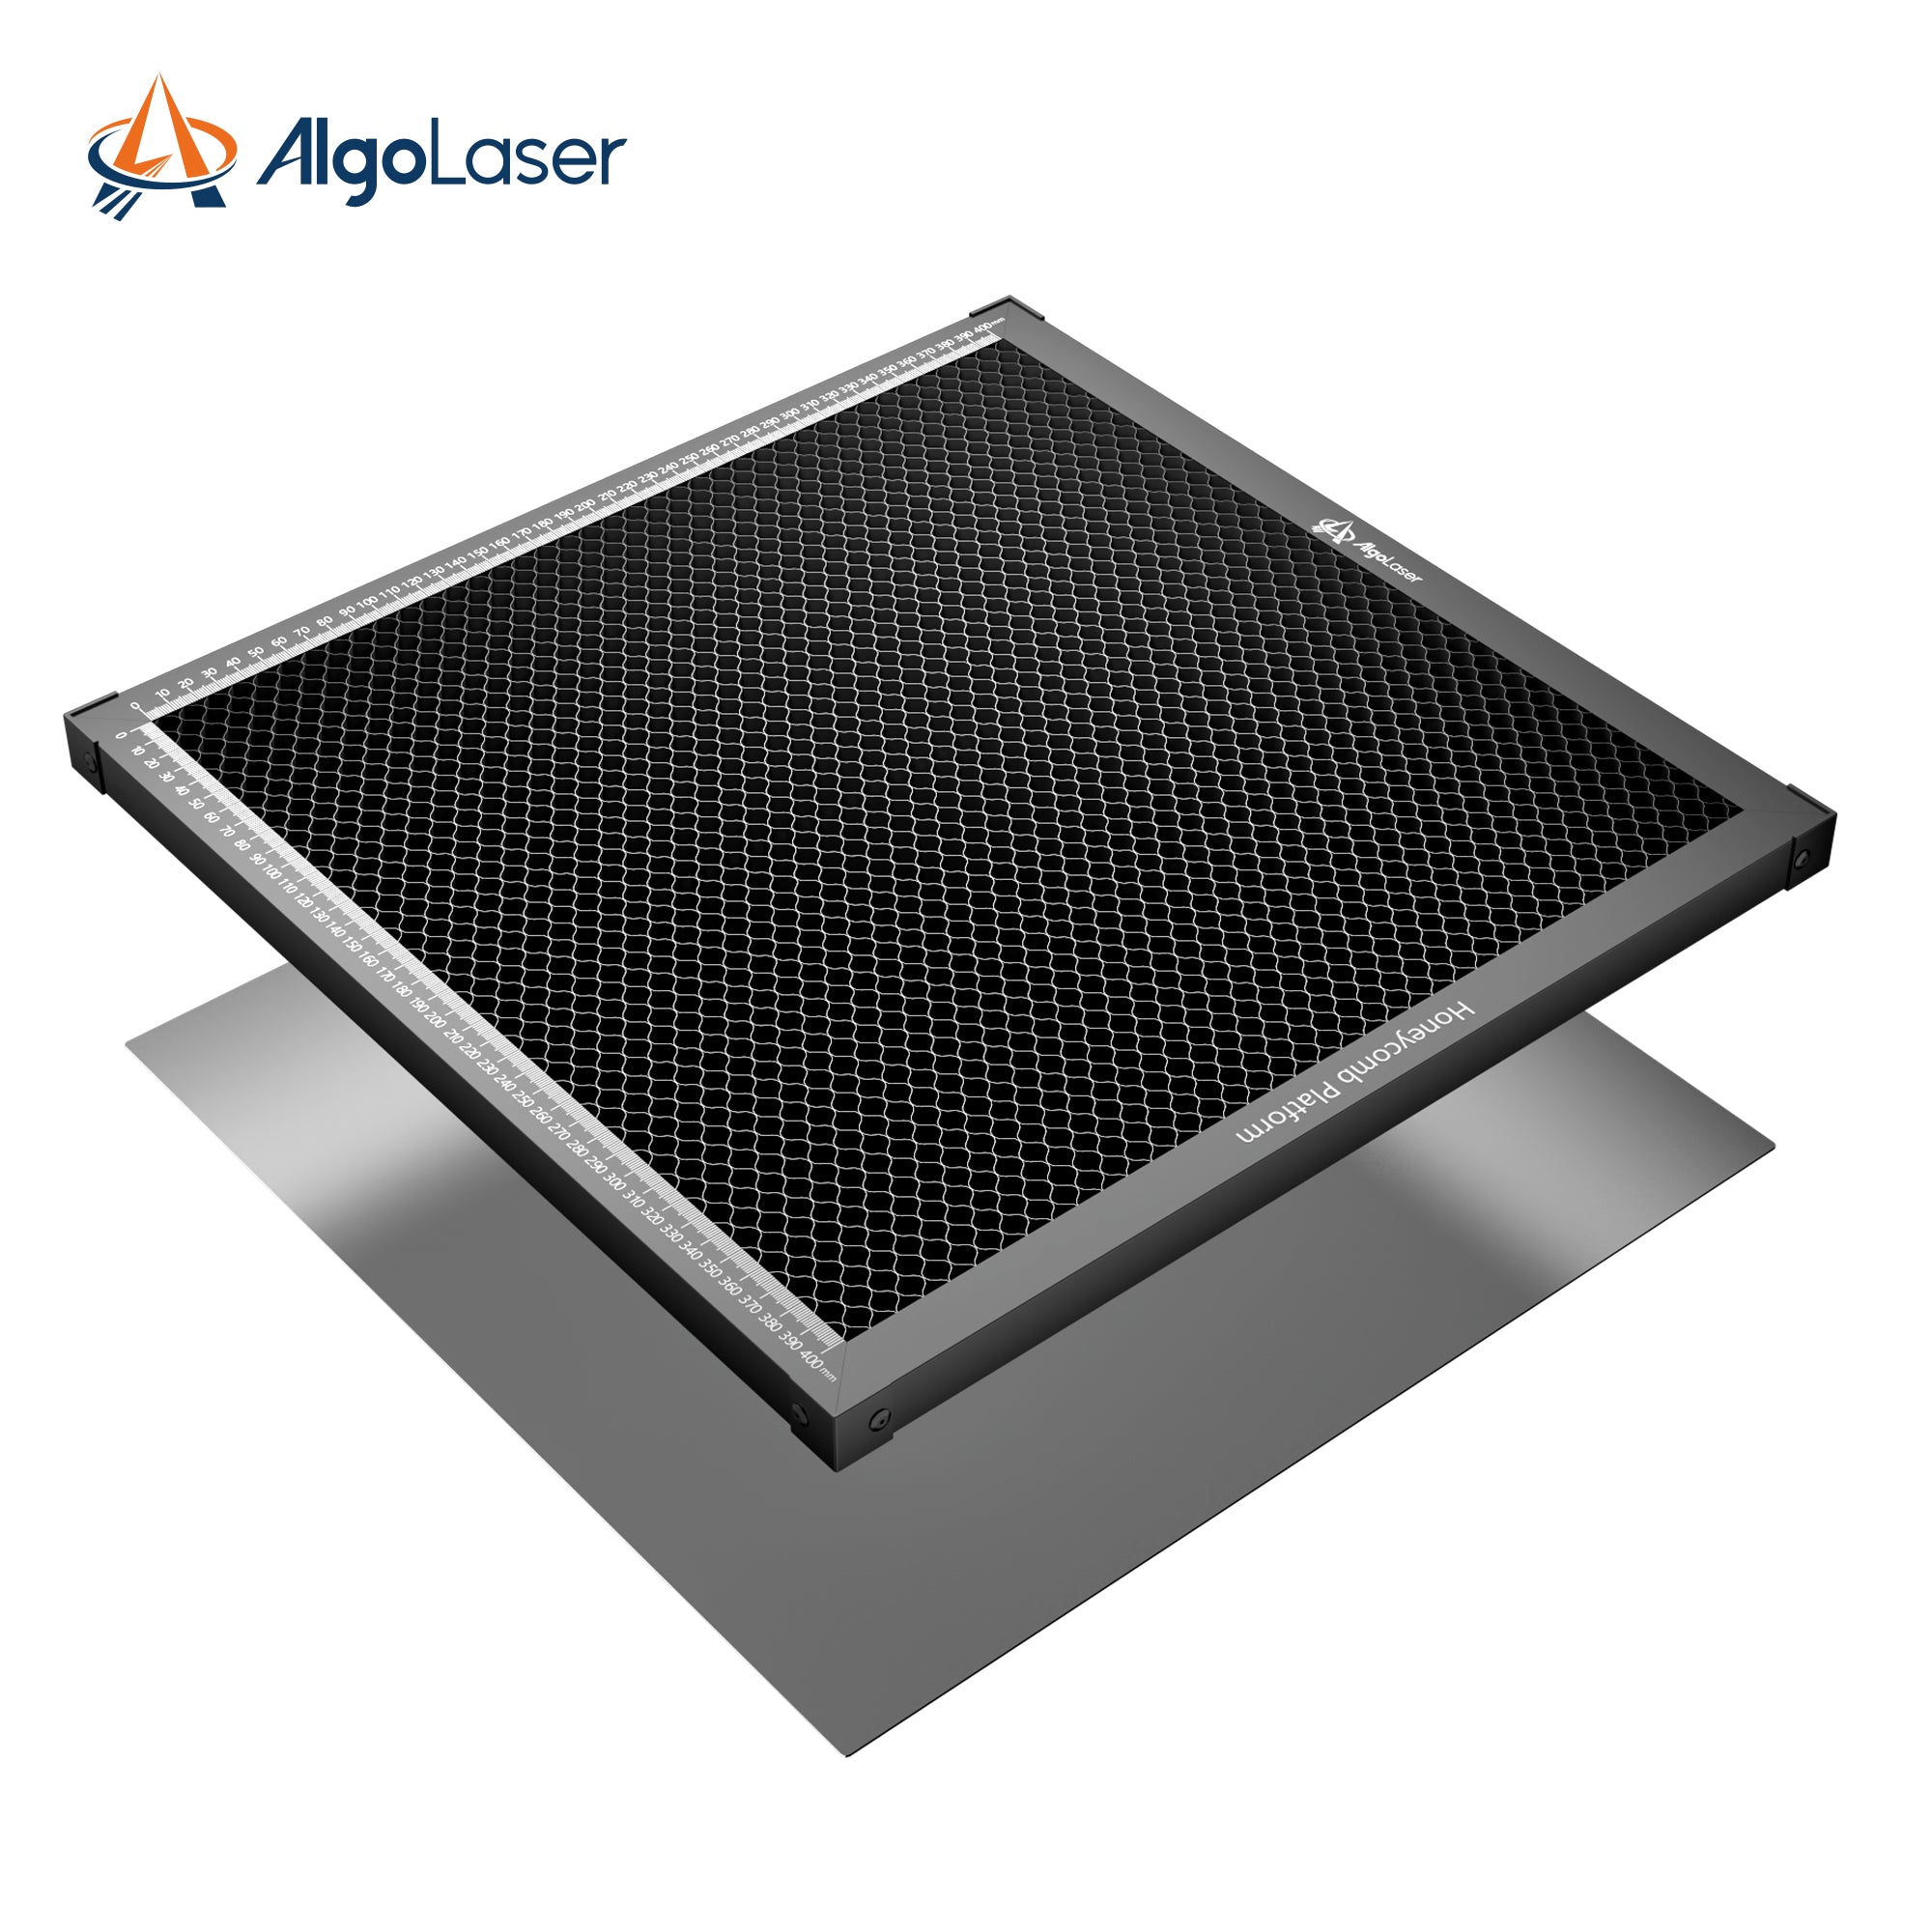 Honeycomb Table Co2 Laser Engraver  Laser Honeycomb Table Replacement -  Parts - Aliexpress